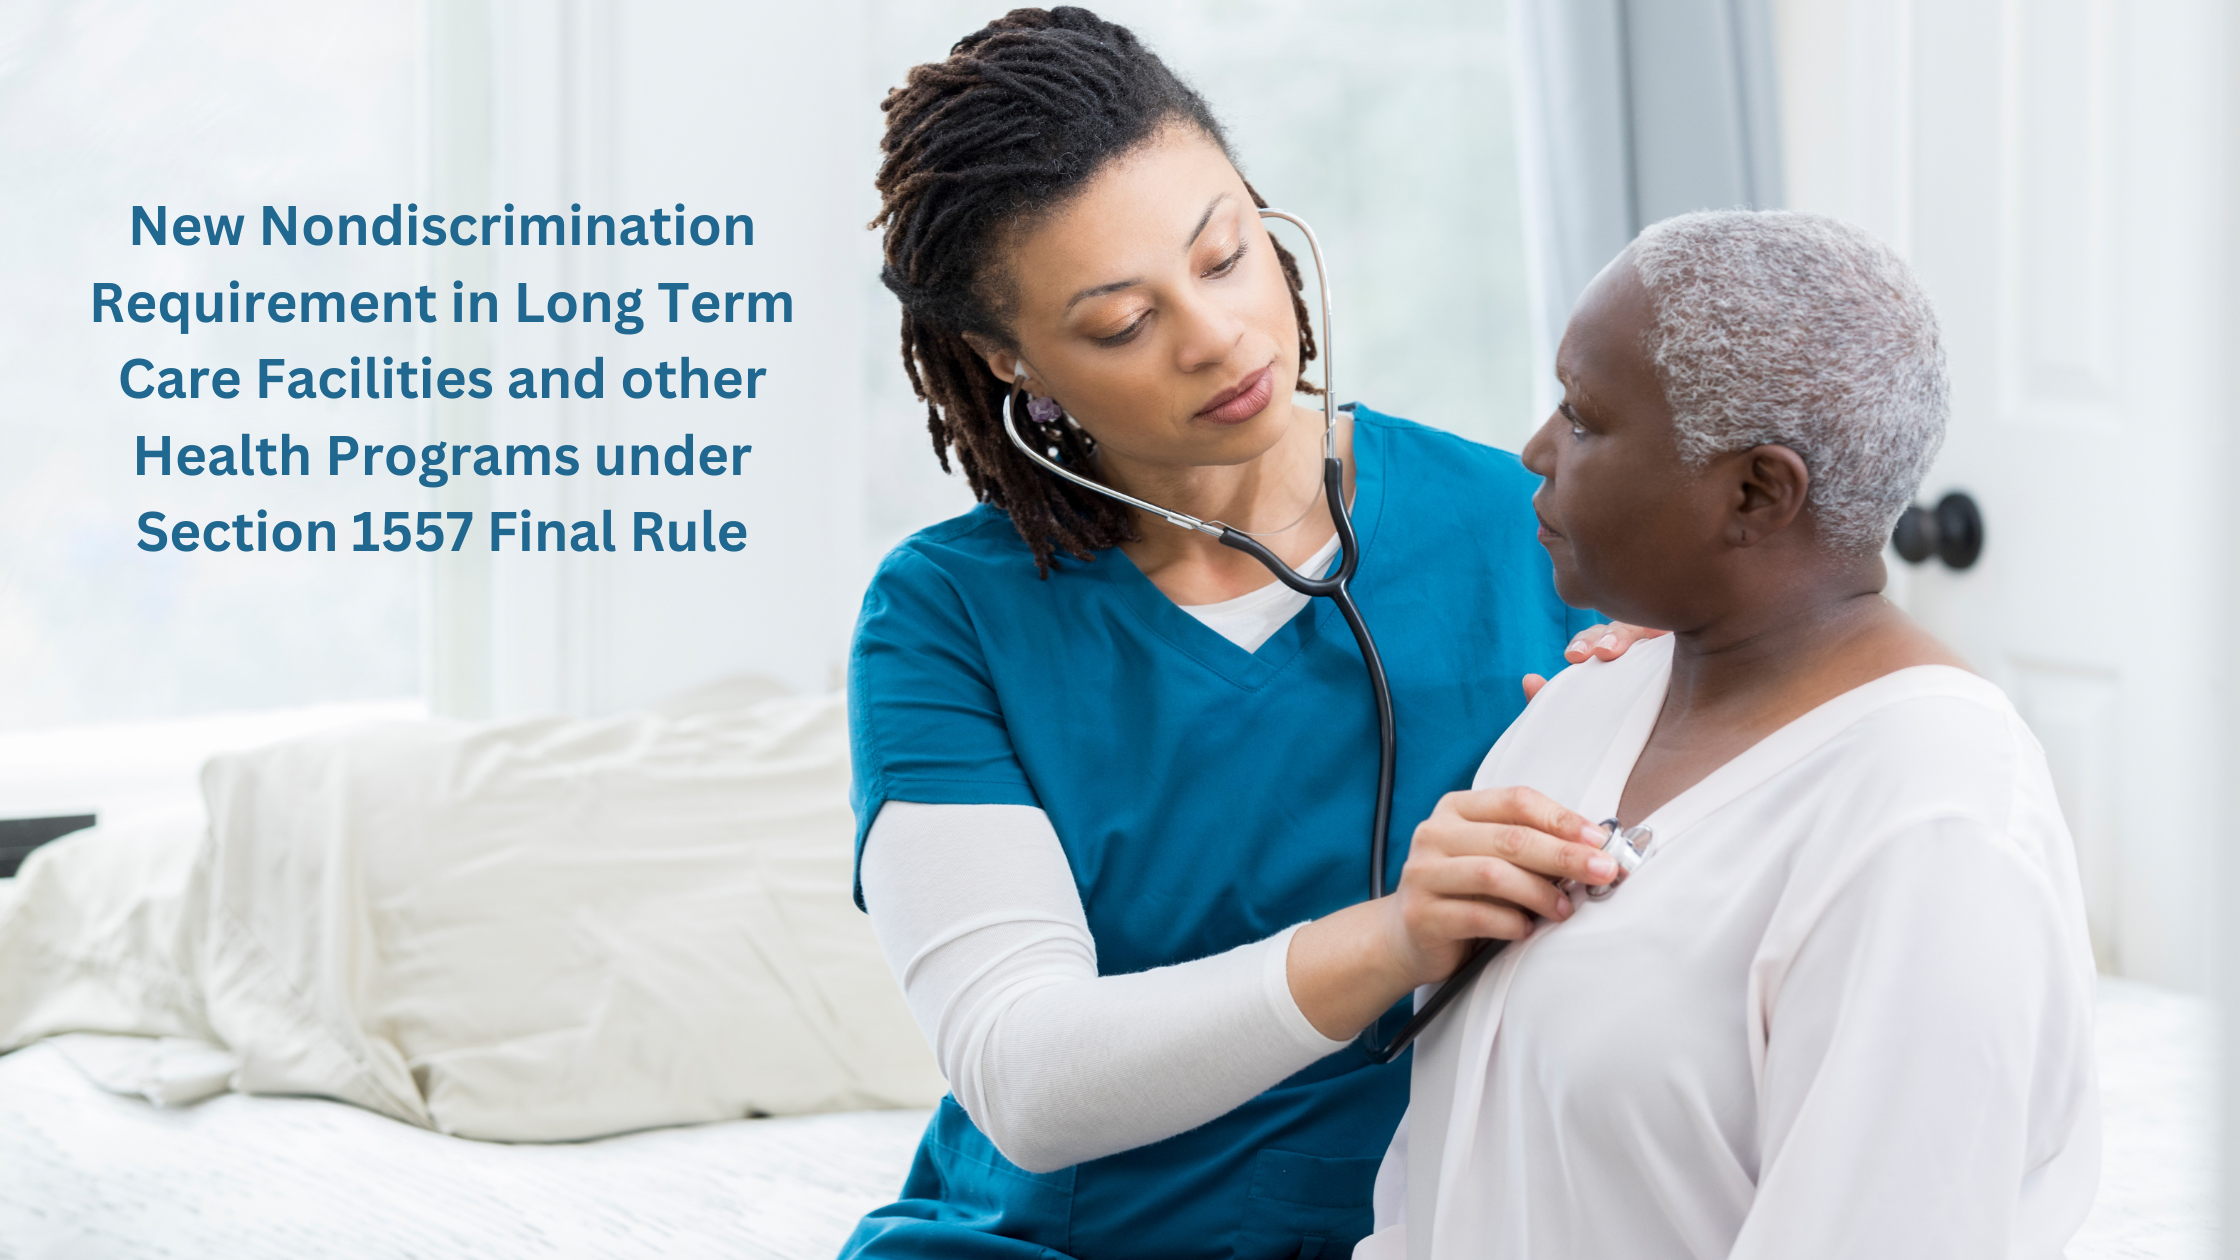 New Nondiscrimination Requirement in Long Term Care Facilities and other Health Programs under Section 1557 Final Rule